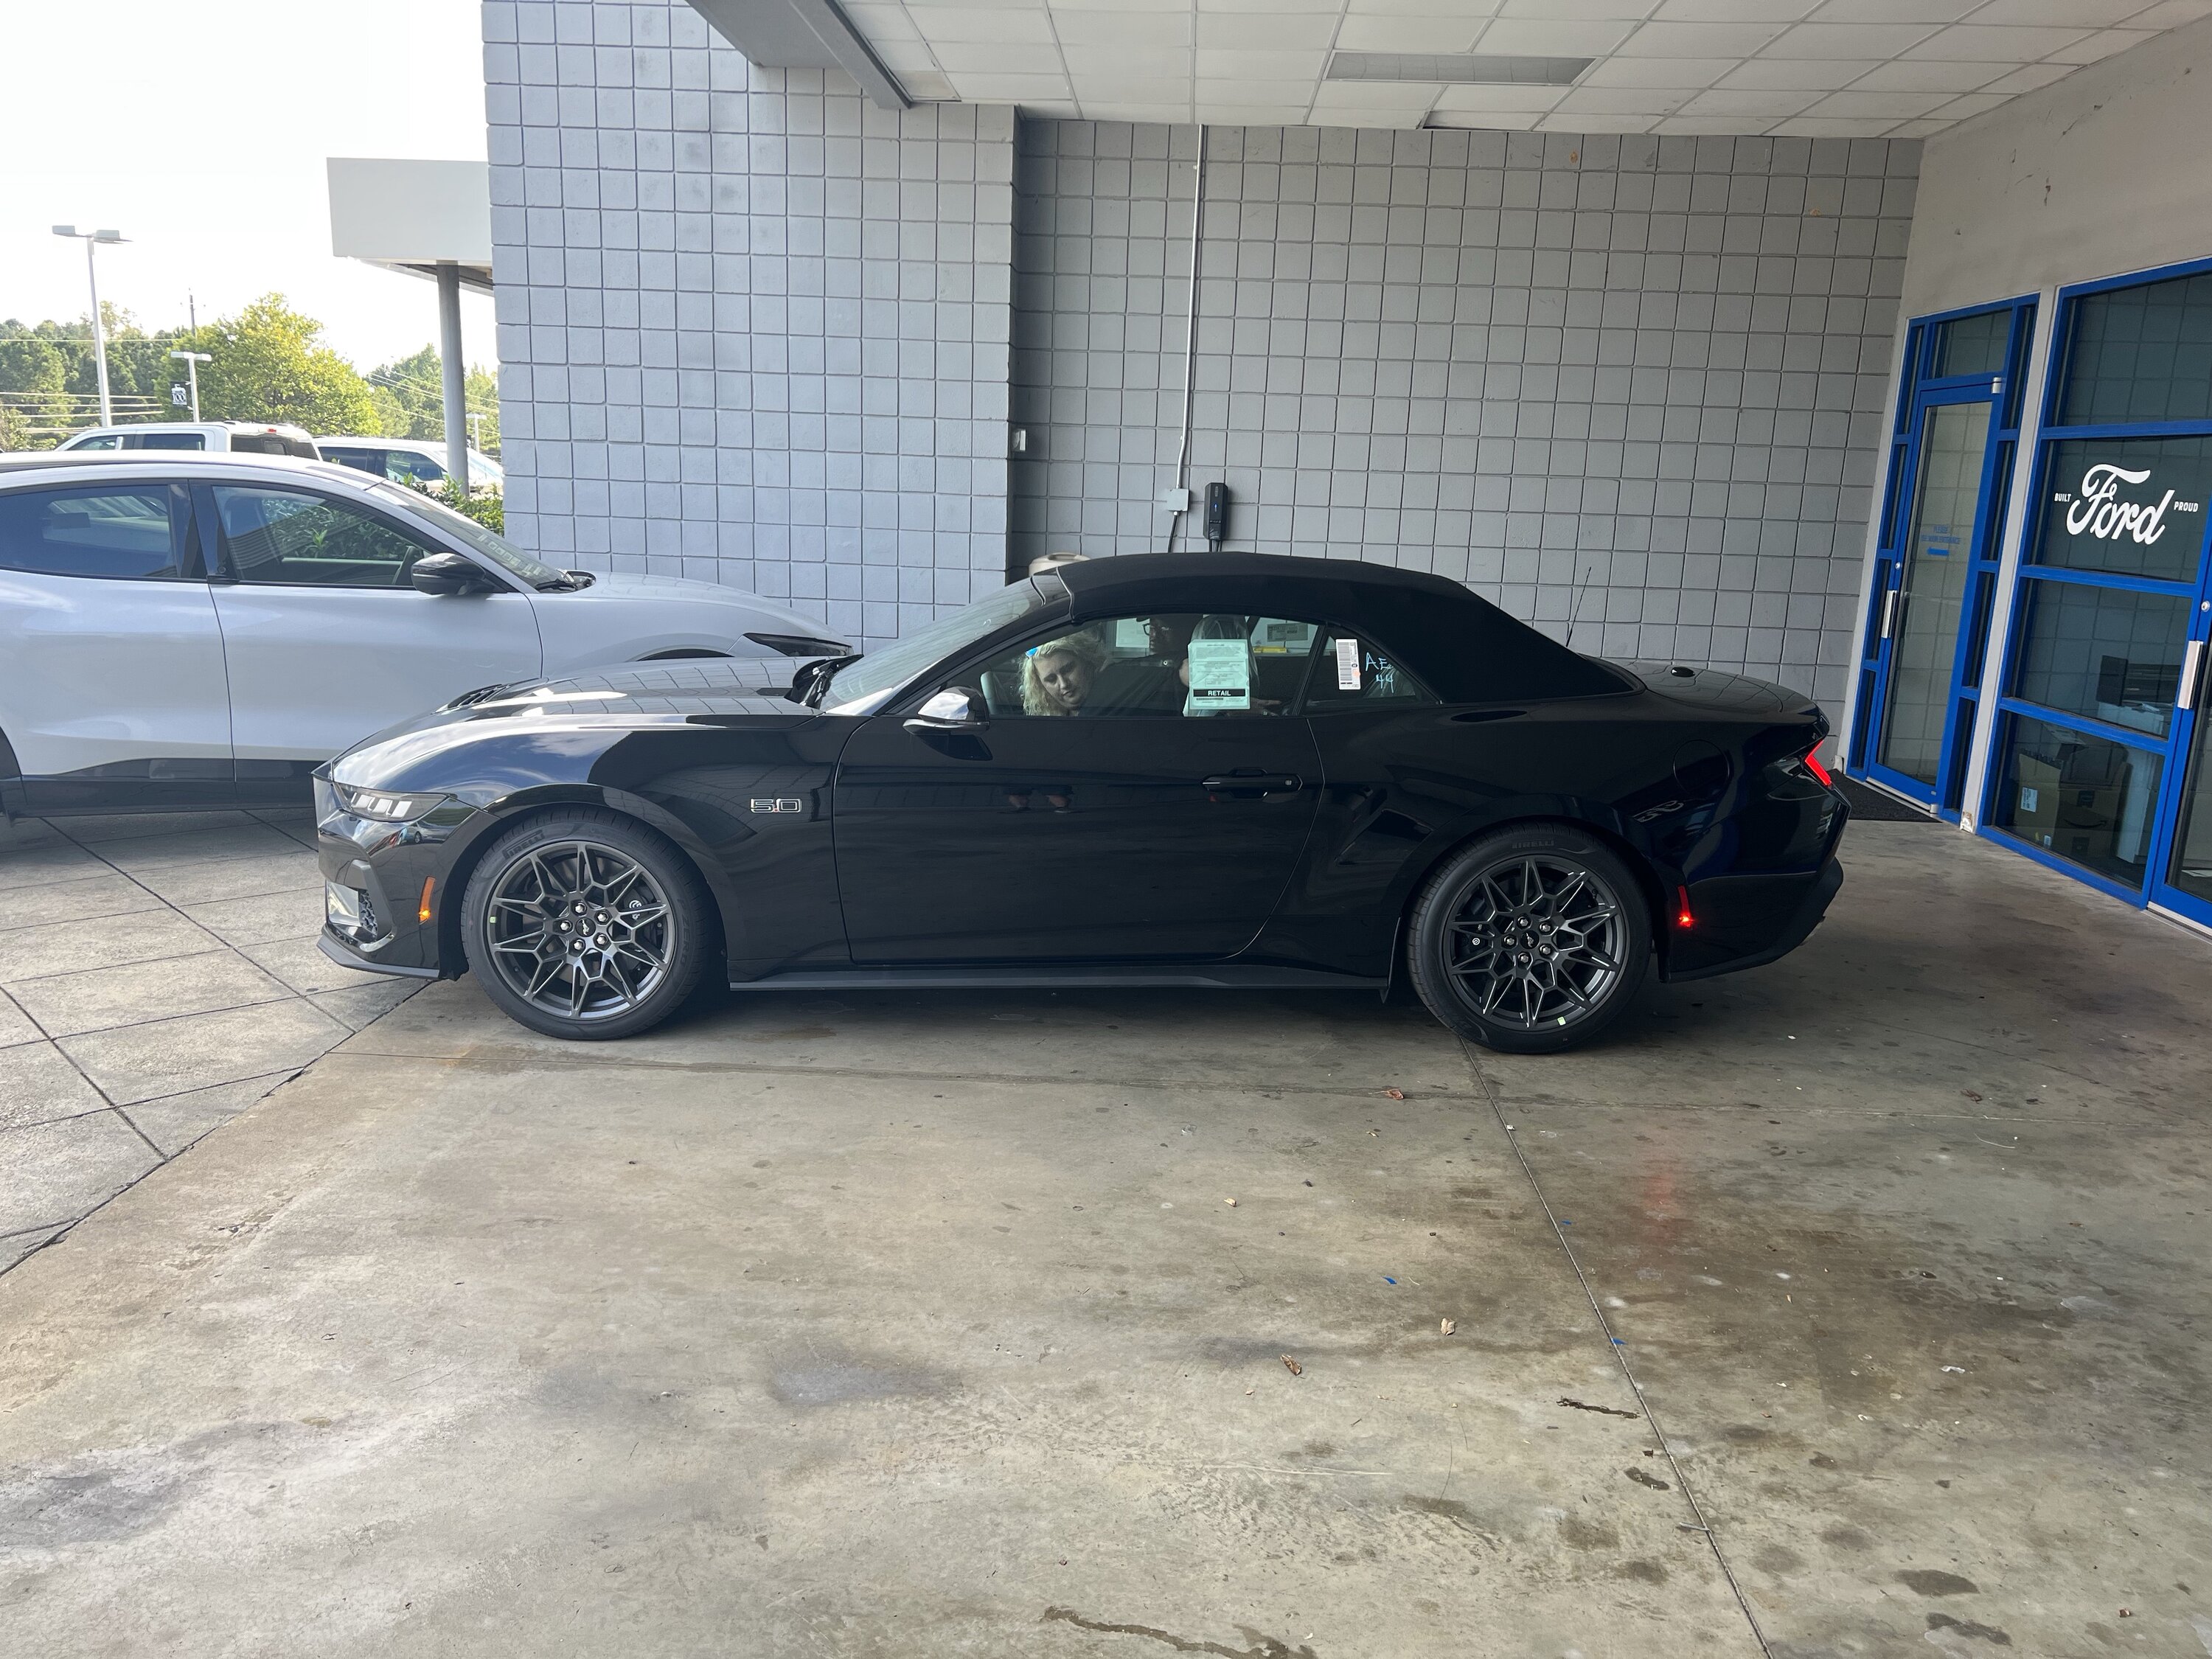 S650 Mustang Triple black convertible for sale IMG_4841